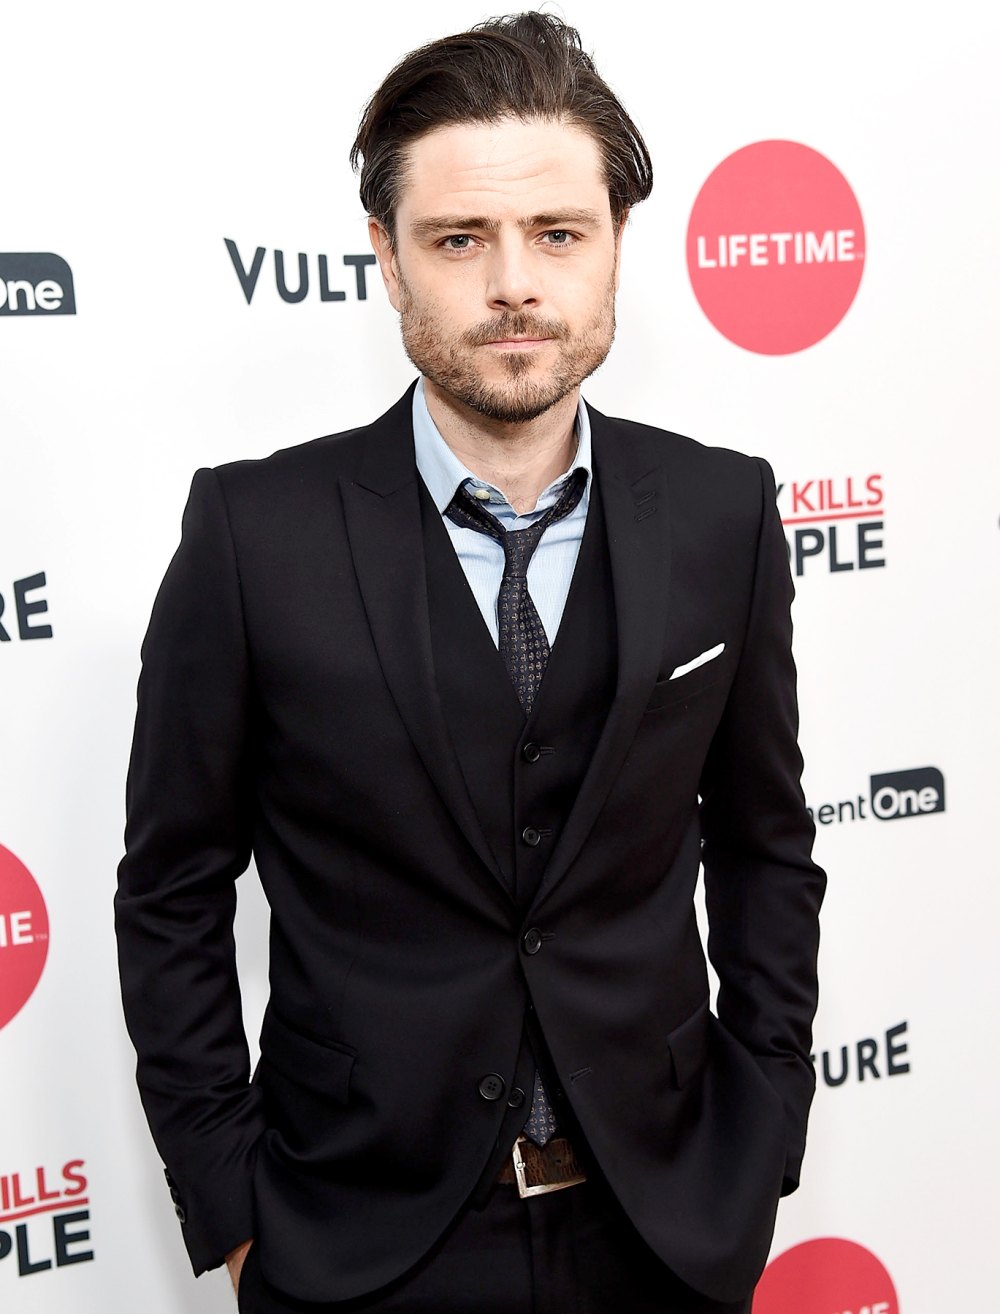 Richard Short attends Lifetime's "Mary Kills People" Broad Focus Screening Event at The London West Hollywood on April 19, 2017 in West Hollywood, California.